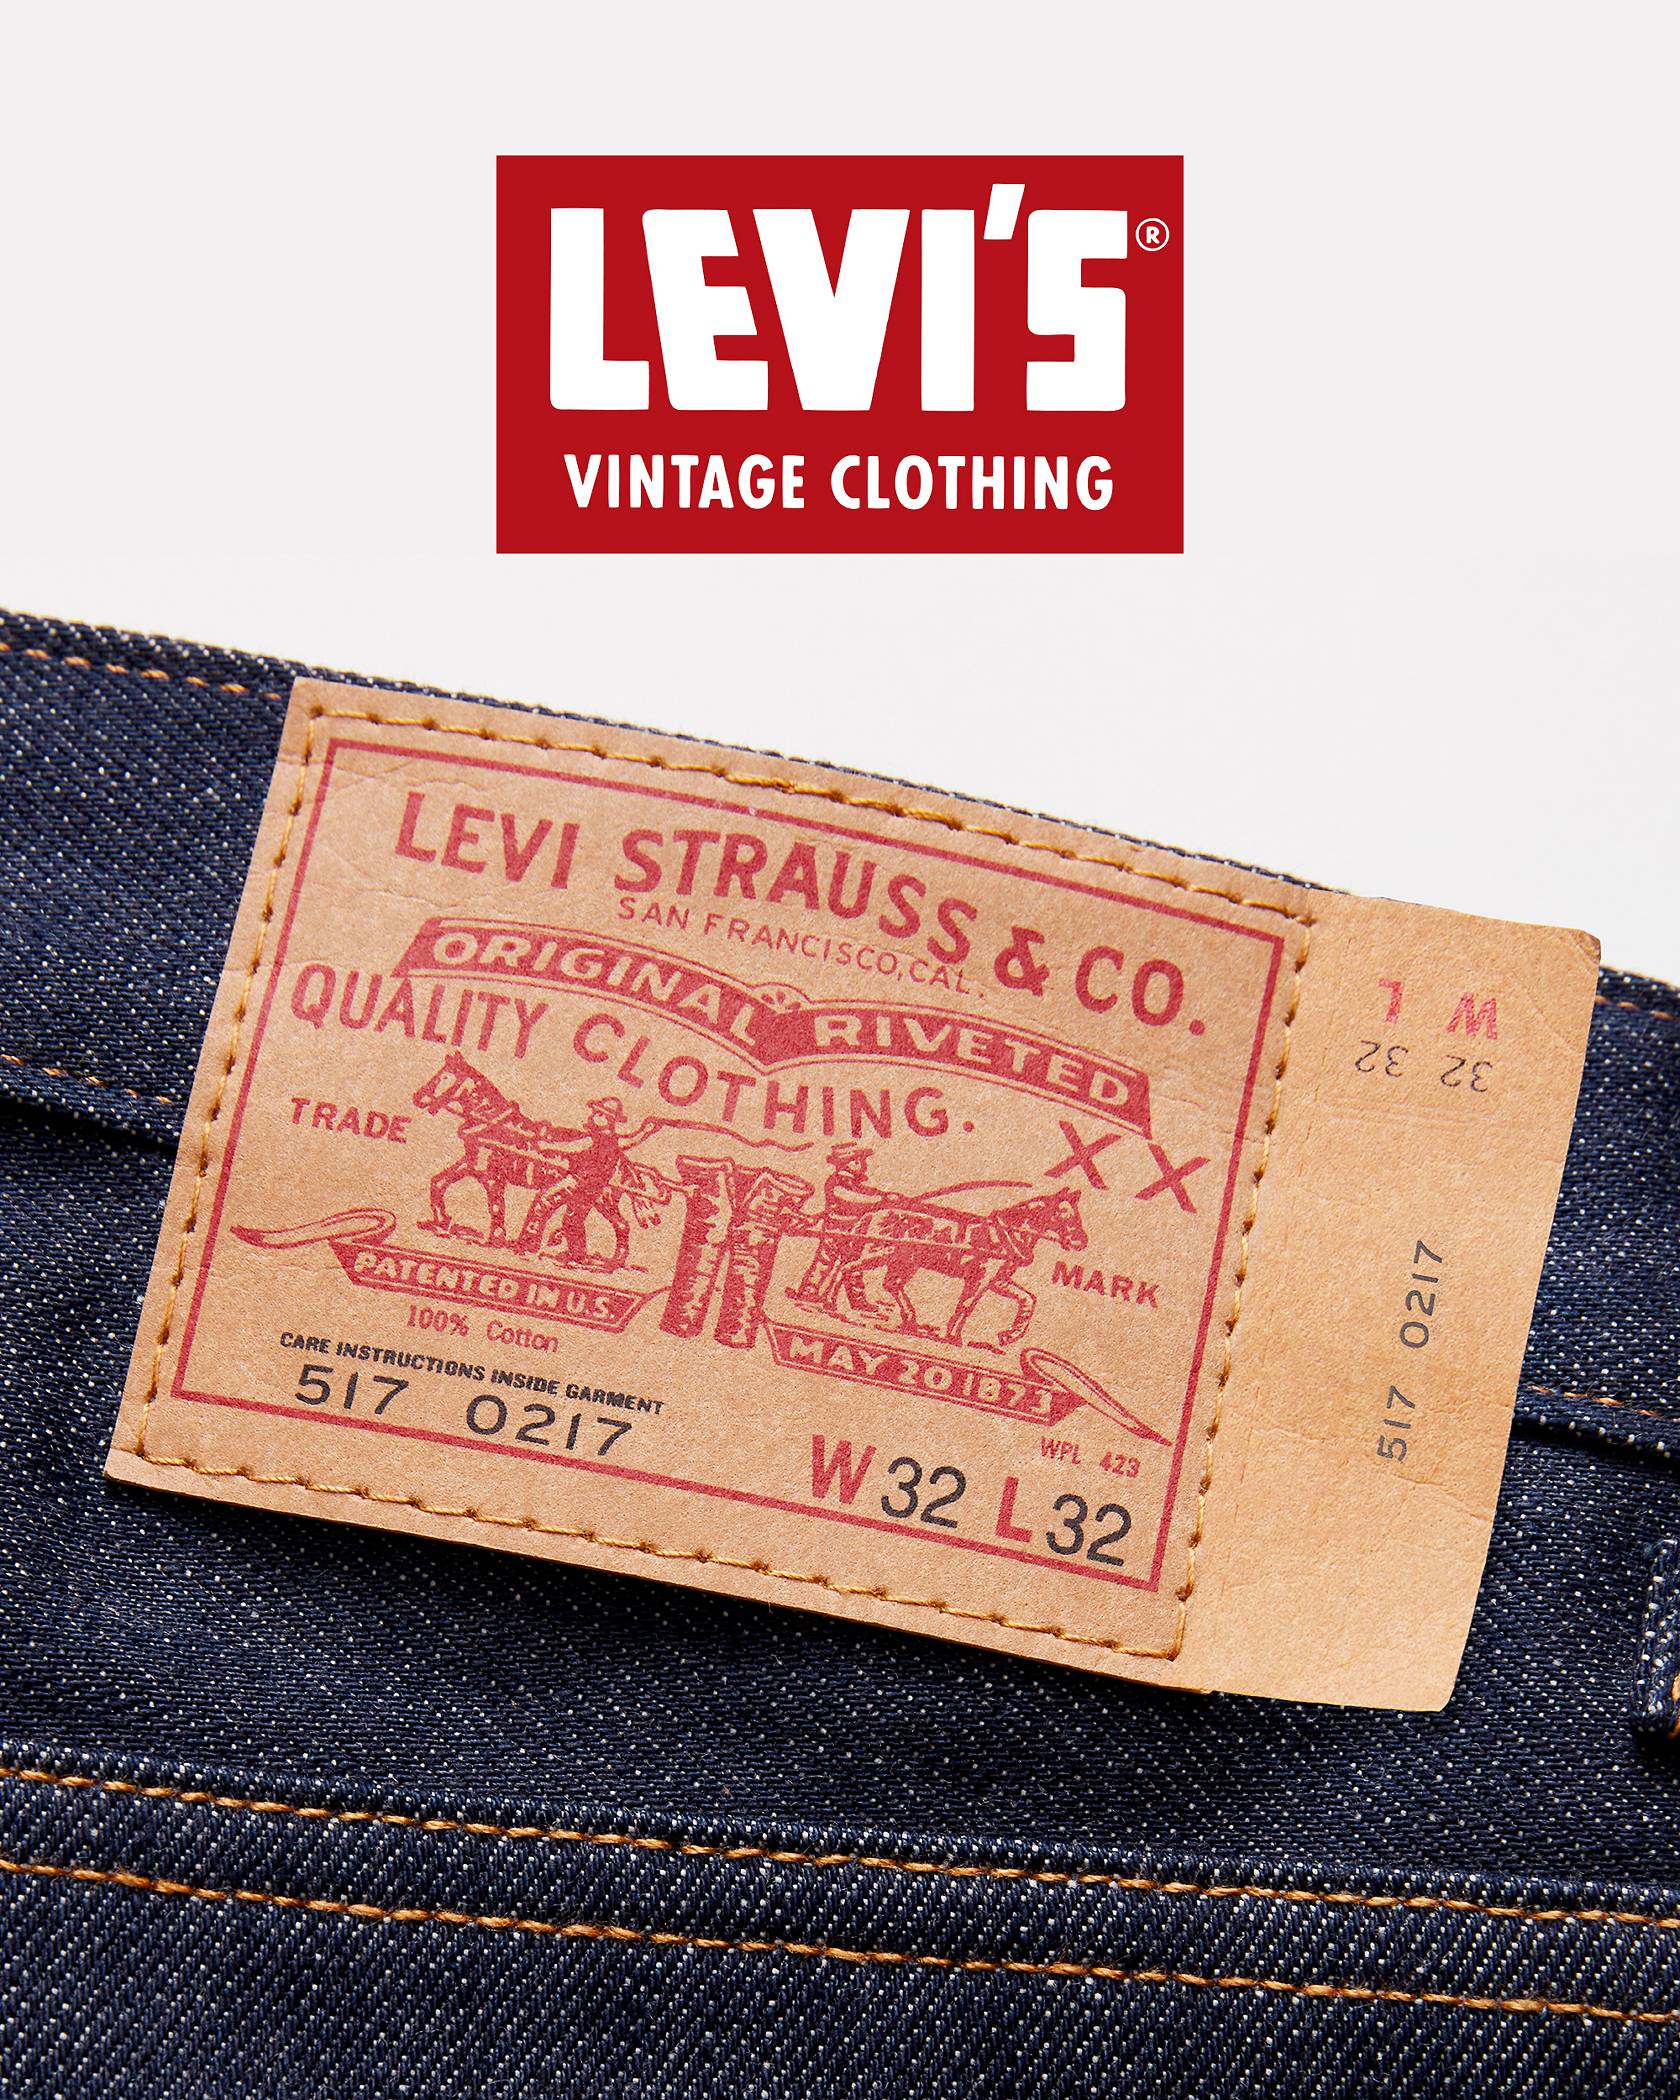 Vintage black and white photo of Levi Strauss holding a pair of jeans.